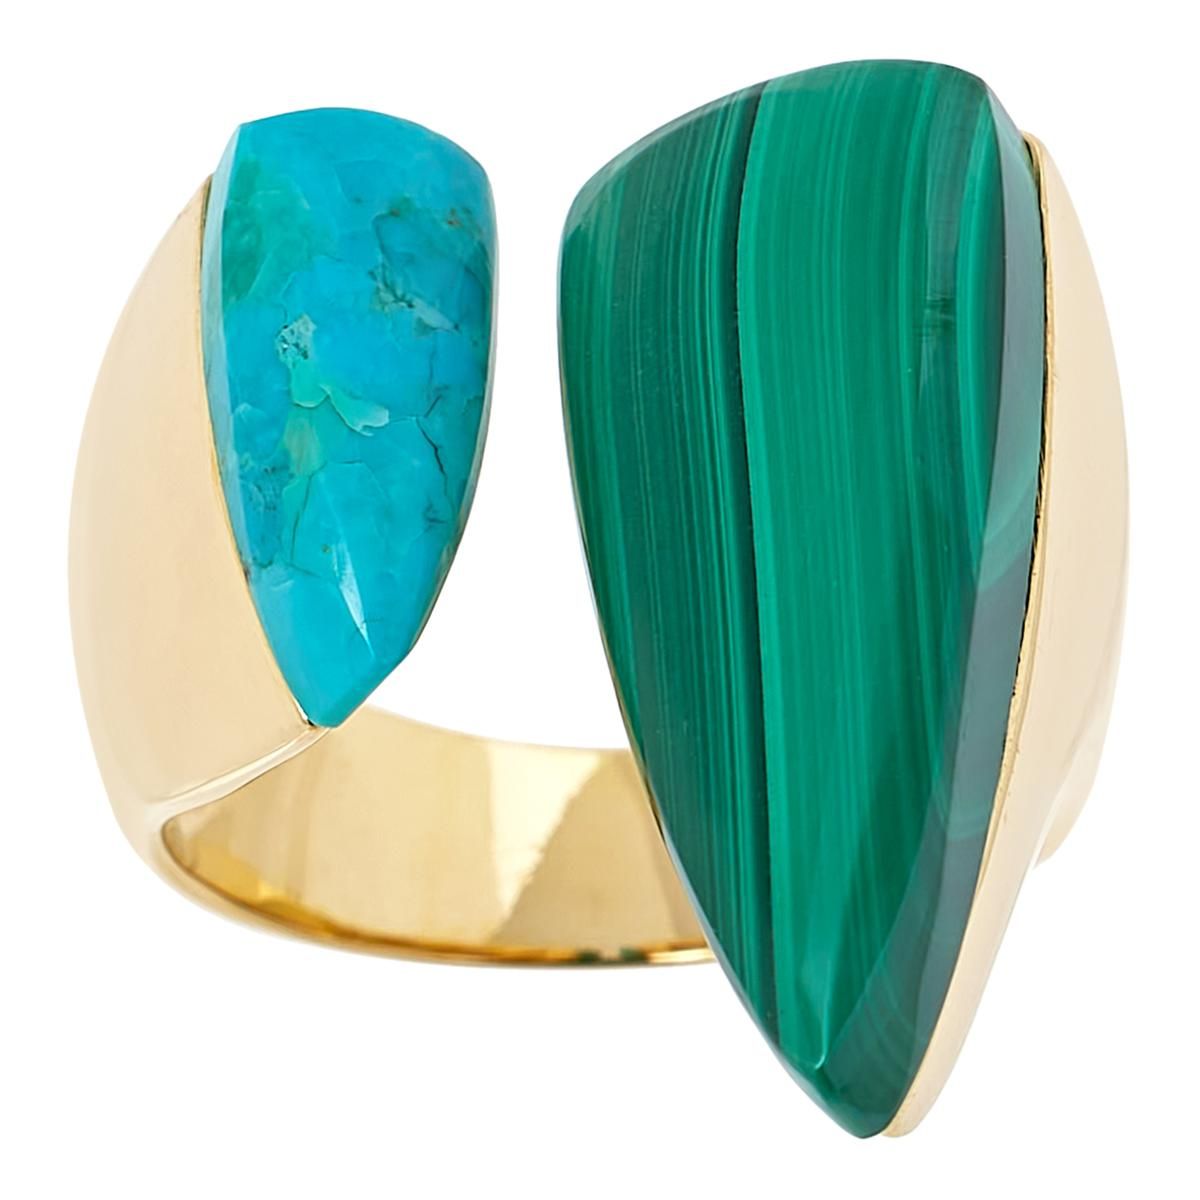 Rarities Malachite and Composite Turquoise Gold-Plated Open Space Ring - 22830752 | HSN | HSN